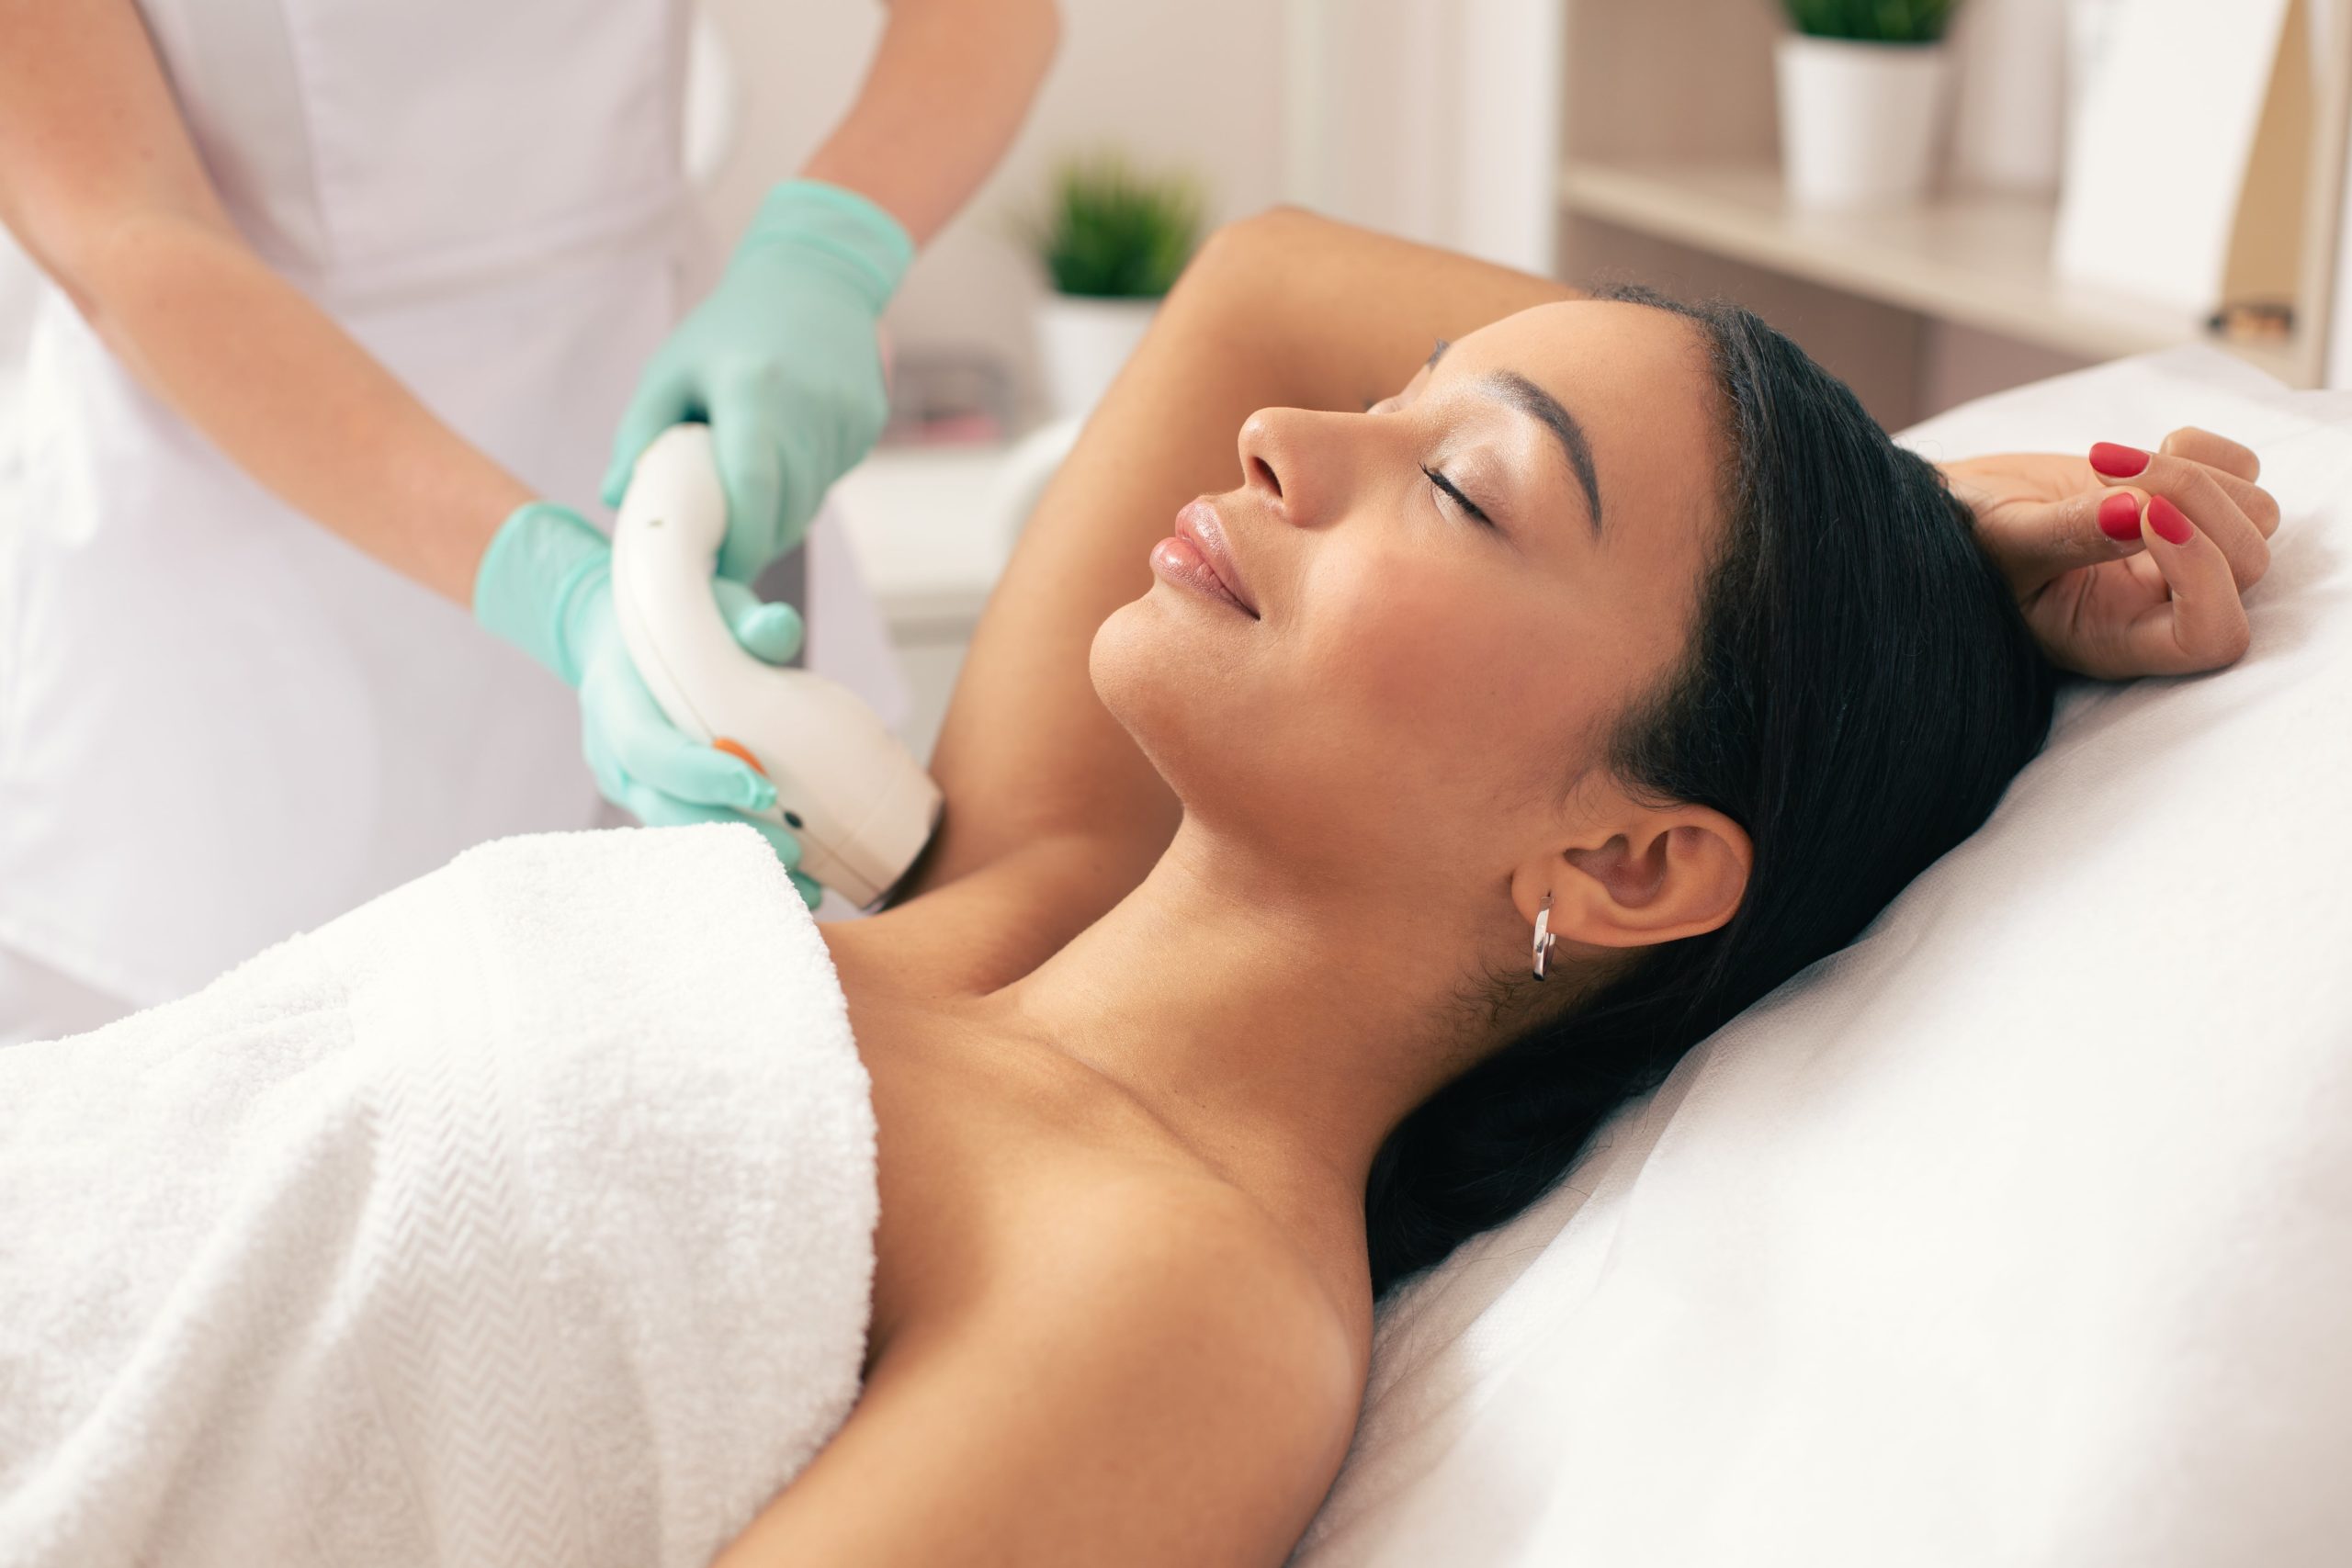 Closed Eye Laying Woman Having Laser Hair Removal Treatment | Purely Natural Medical Spa in Brooklyn, NY